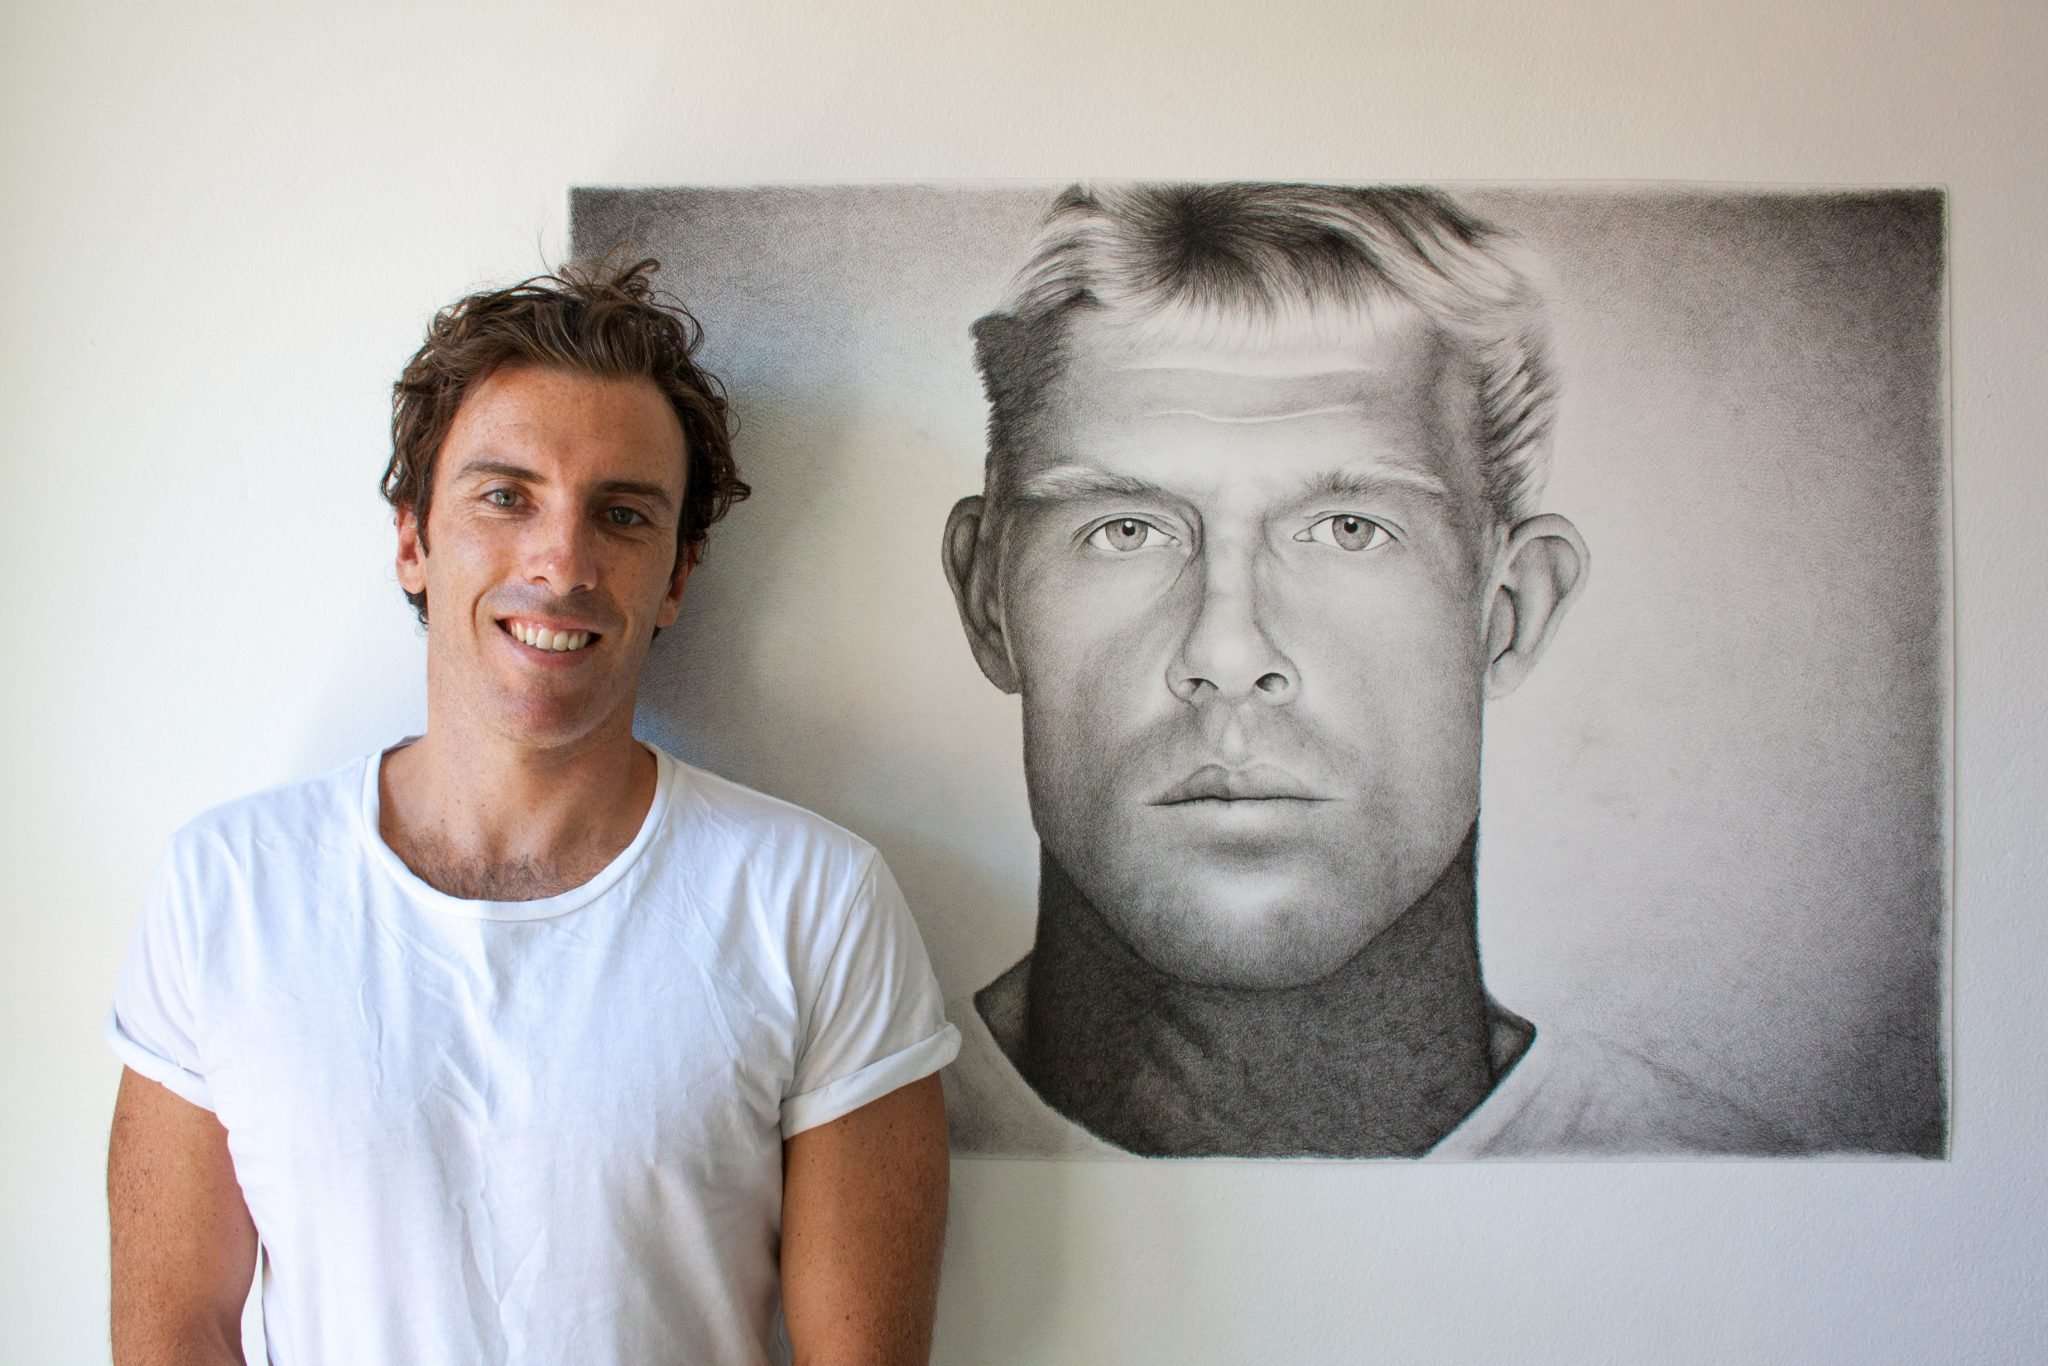 Mick Fanning drawing by artist Dean Spinks